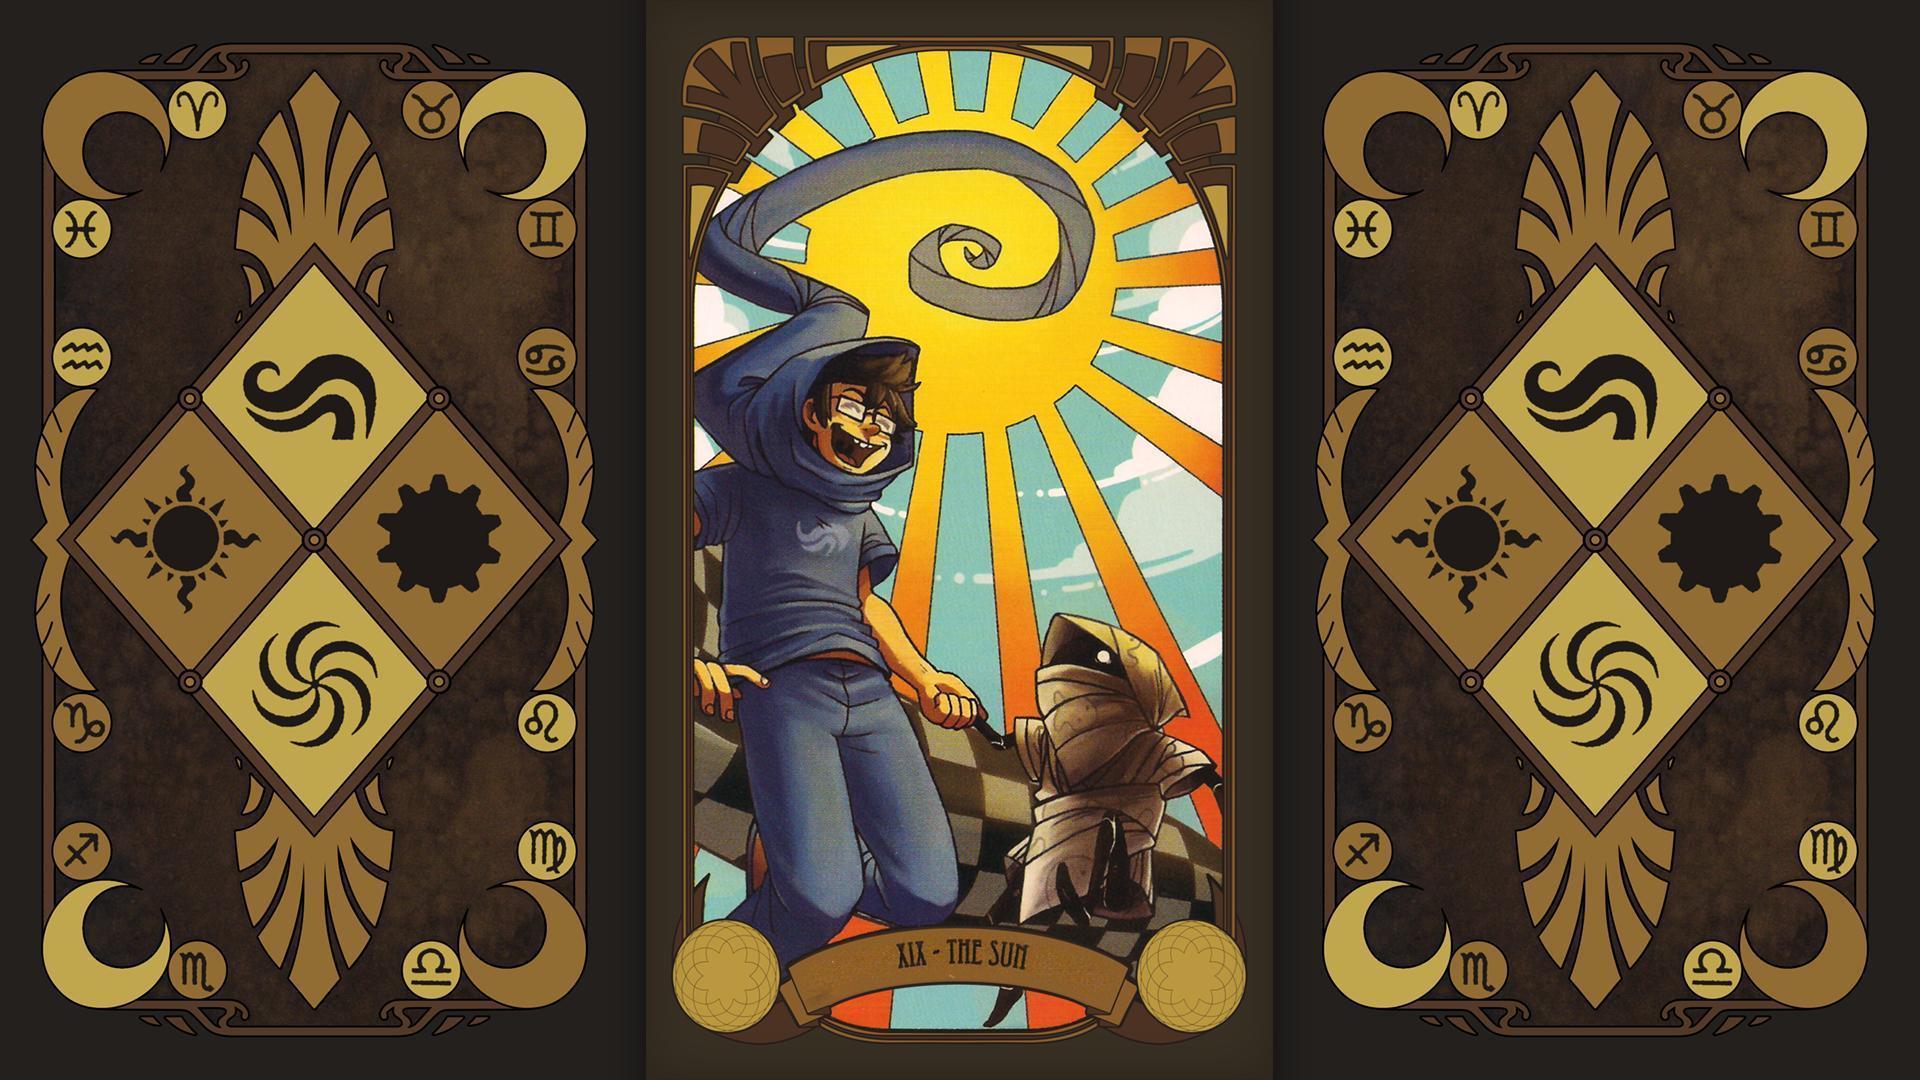 Took the time to scan in all the Homestuck Tarot Cards and make